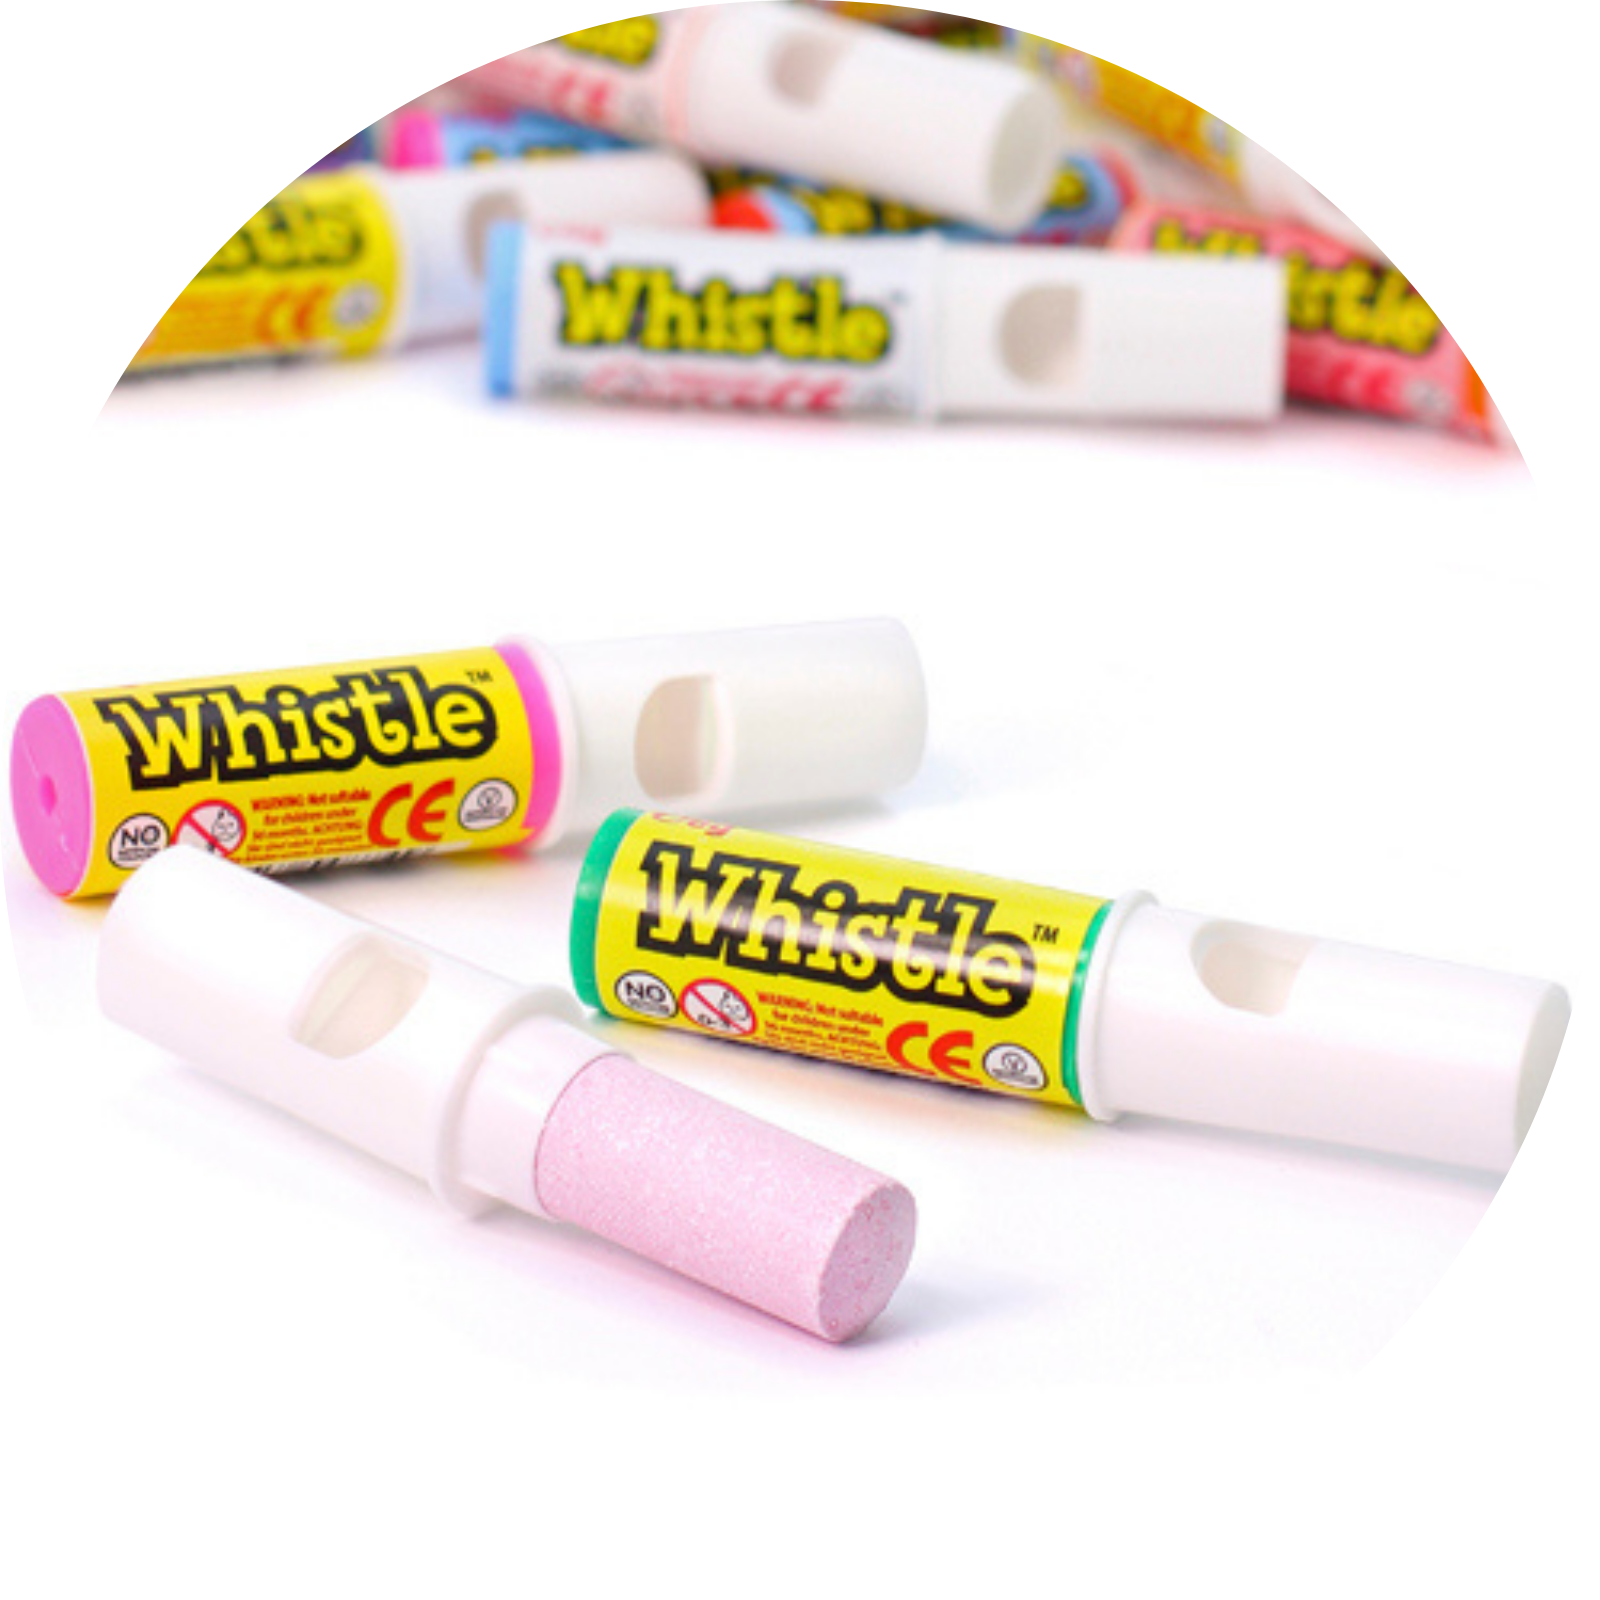 Candy Whistle